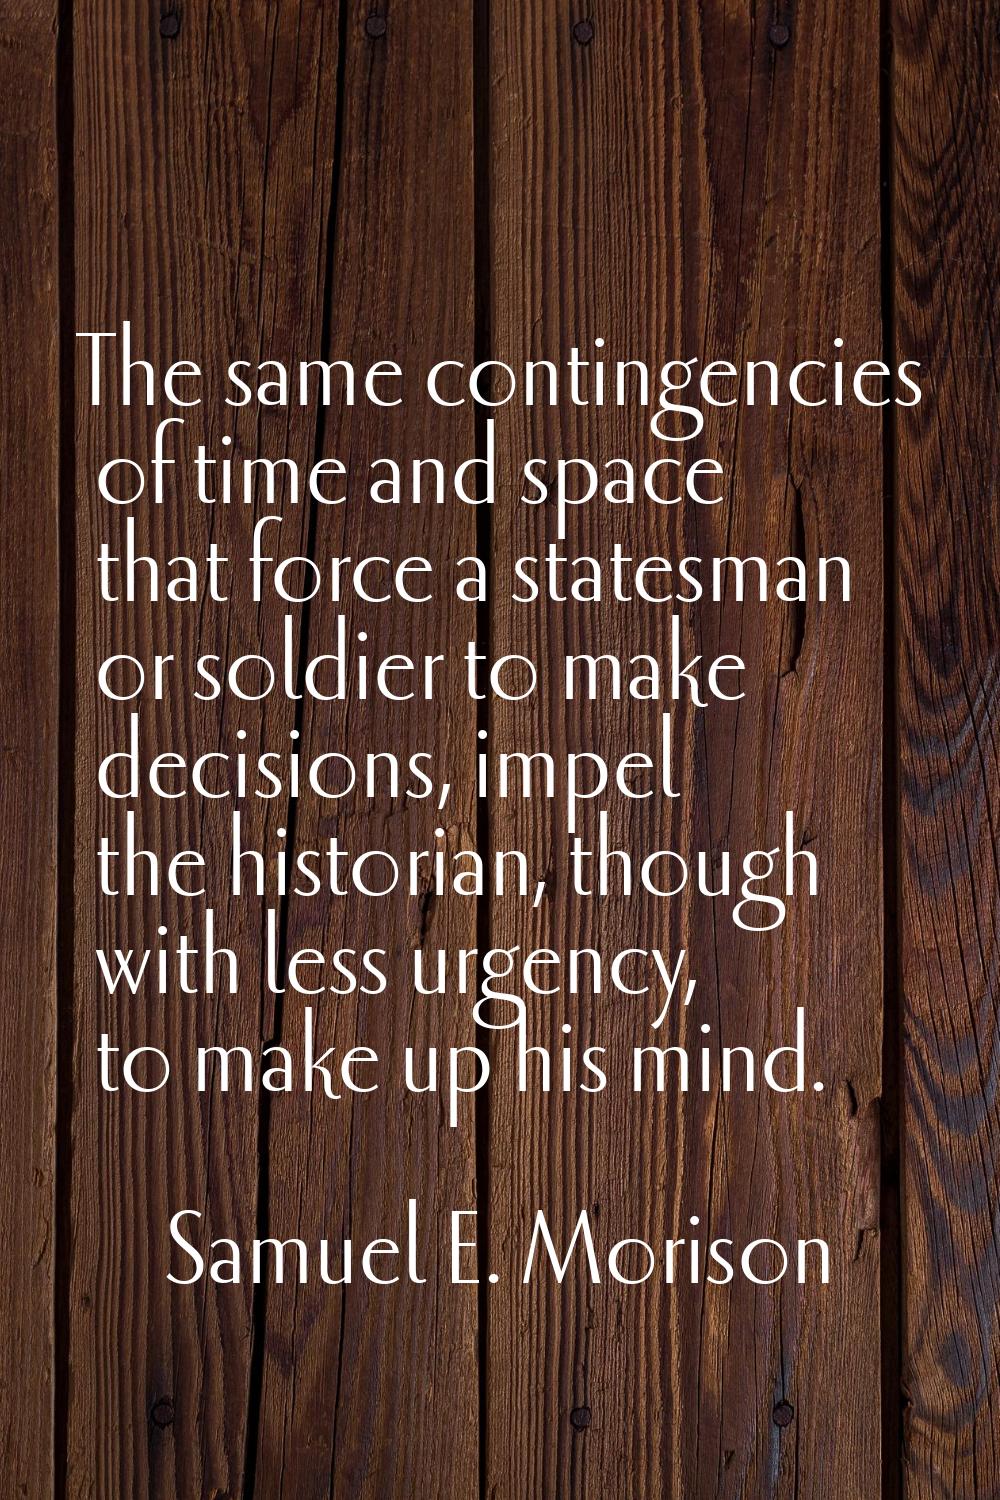 The same contingencies of time and space that force a statesman or soldier to make decisions, impel